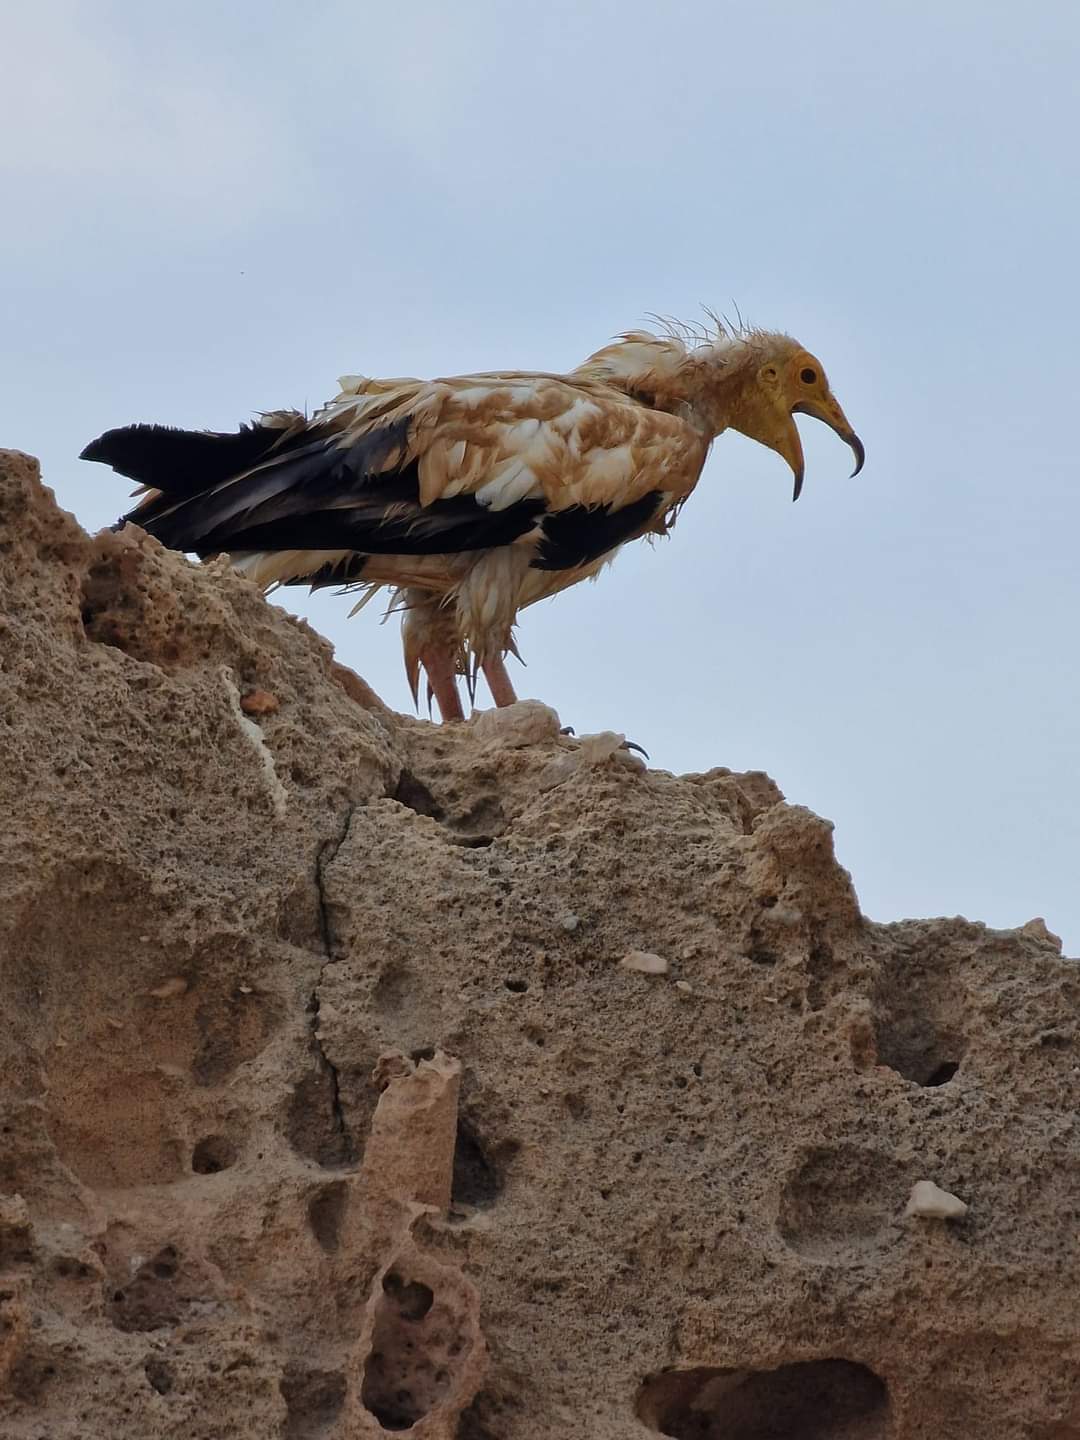 A vulture in Socotra